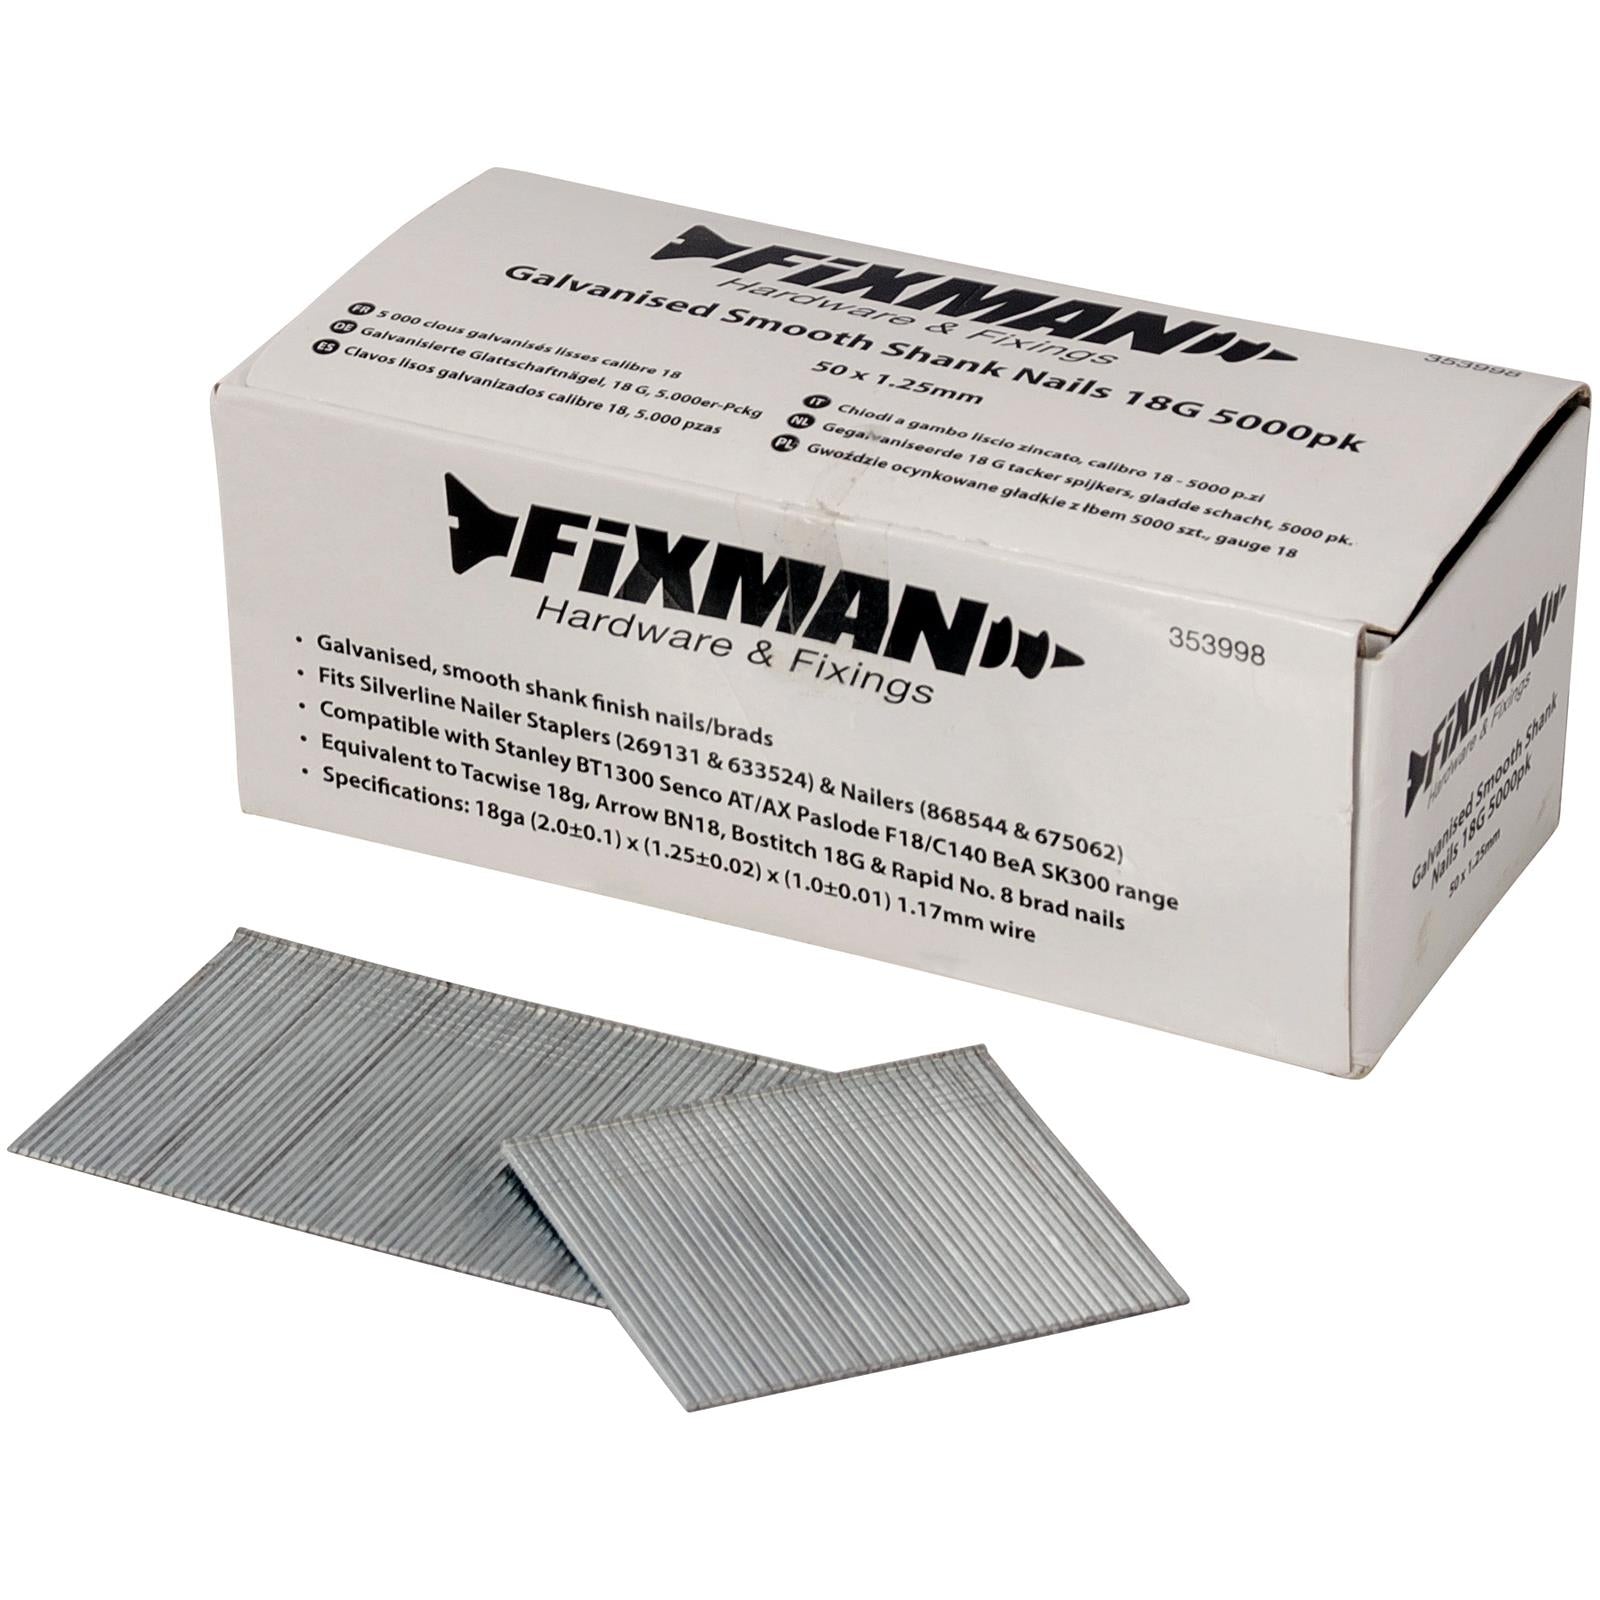 Fixman 5000pc 18 Gauge Galvanised Smooth Shank Nails 50 x 1.25mm